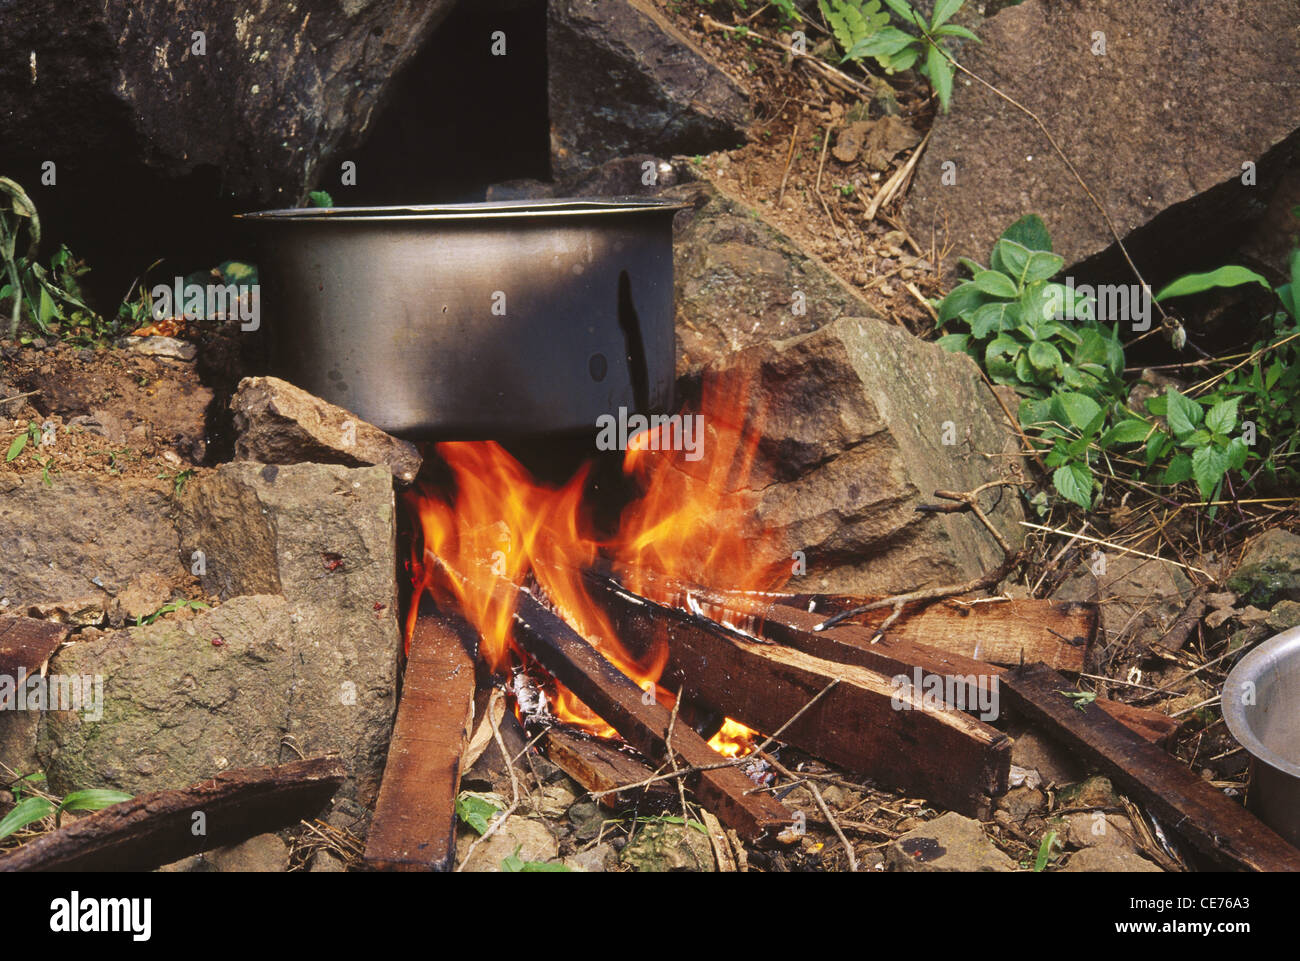 Cooking With Firewood India Asia CE76A3 